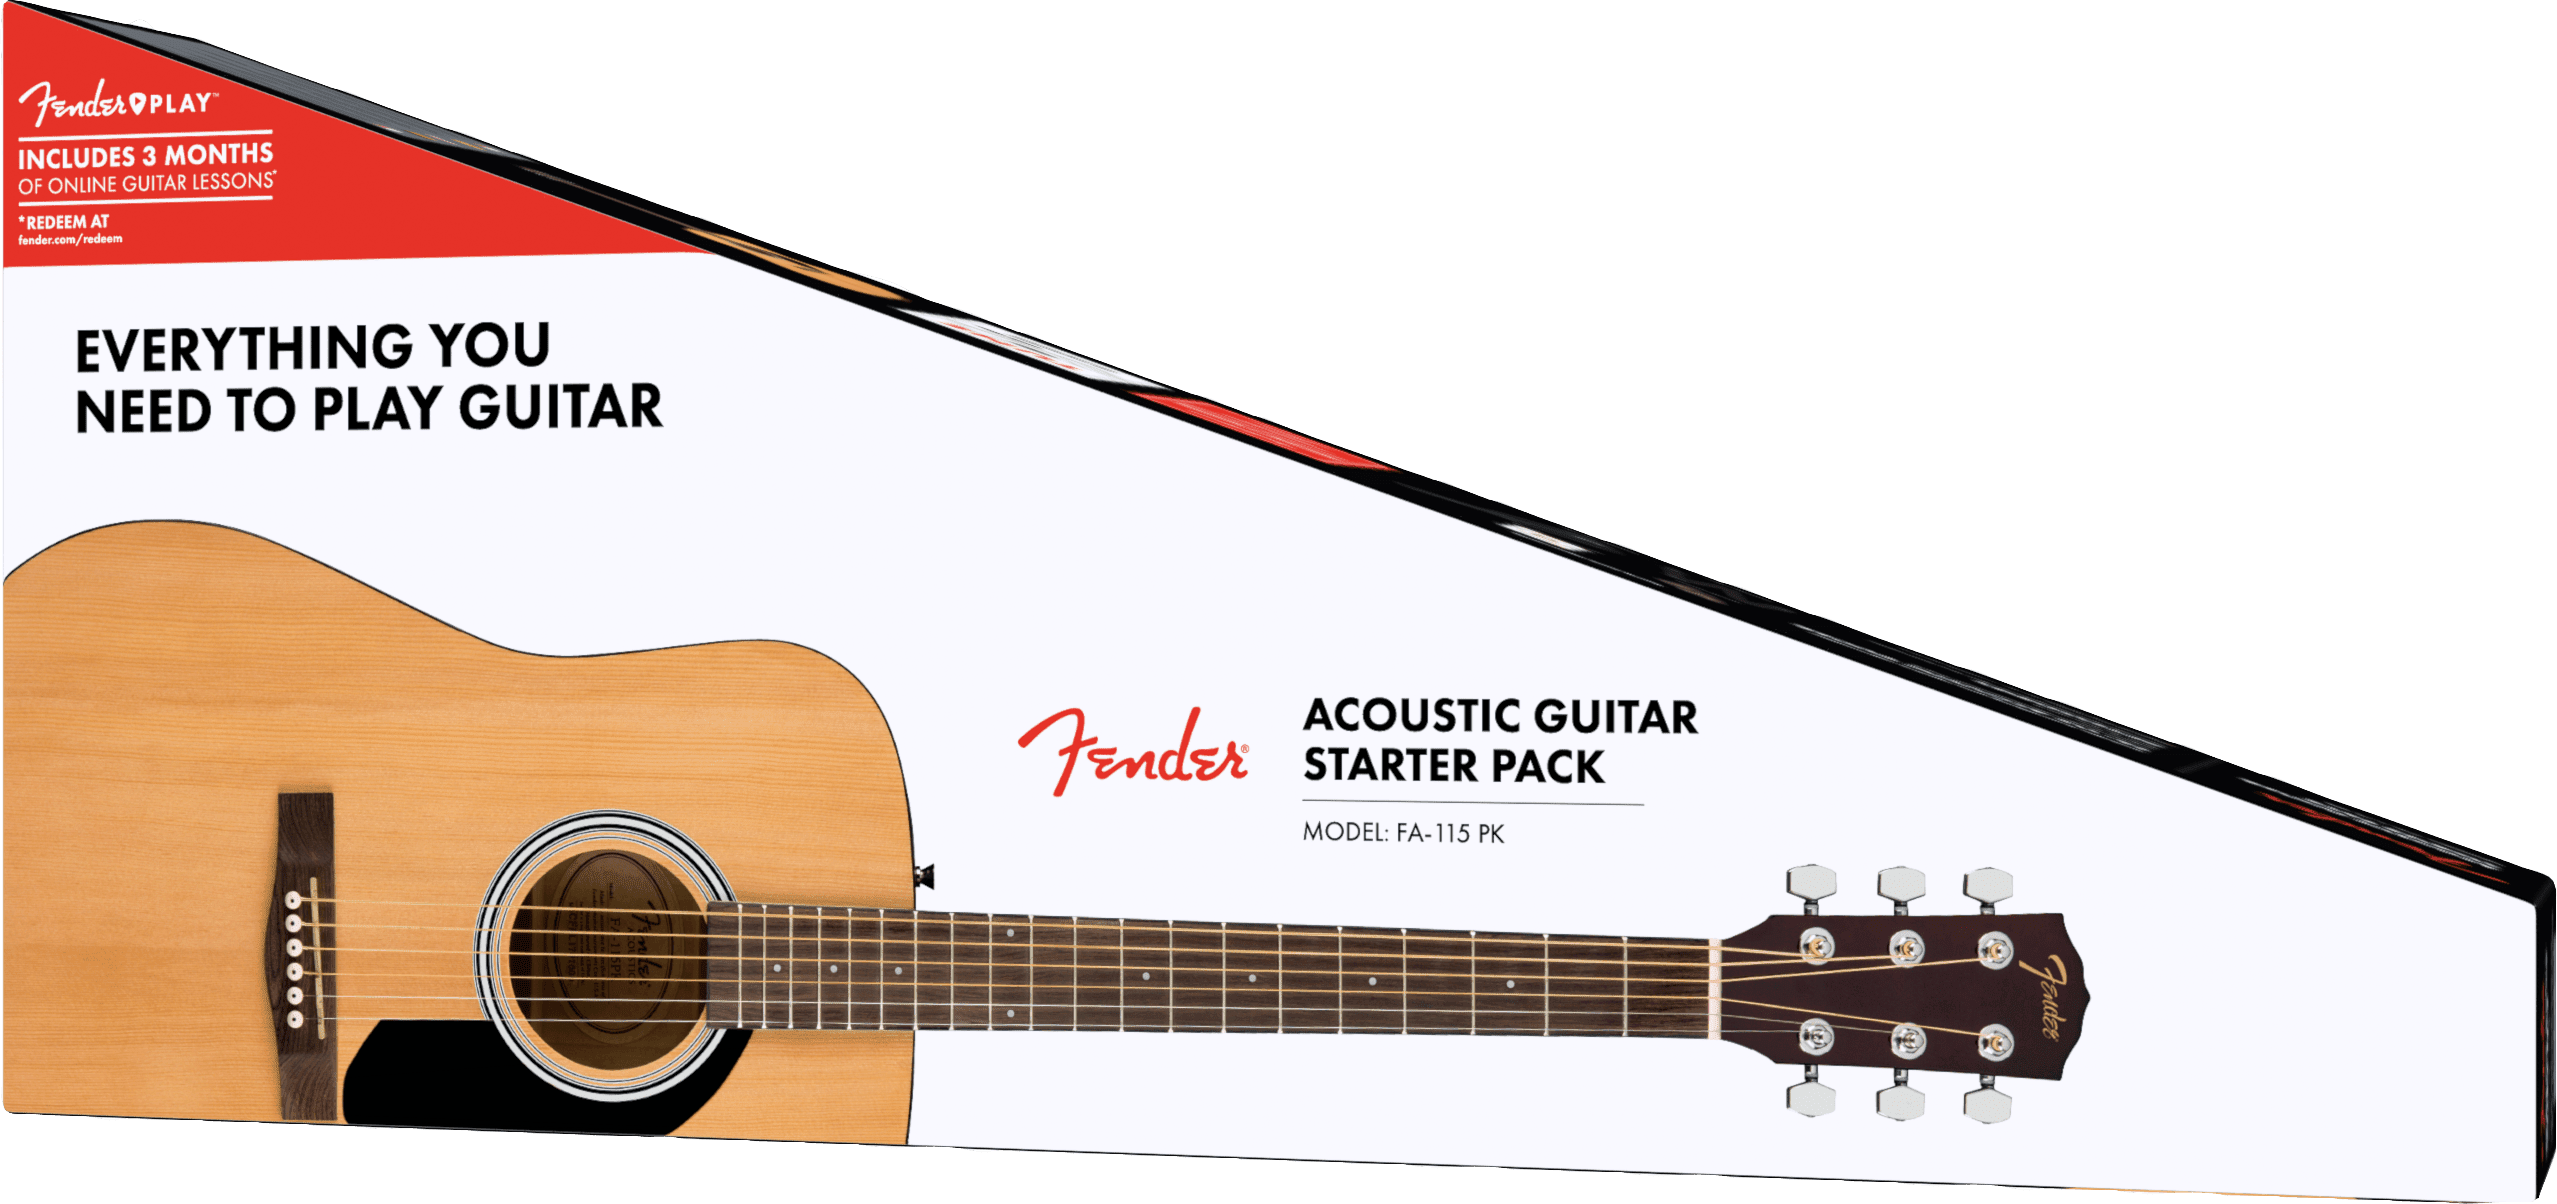 strings,　picks,　Victor　with　instructions　case,　guitar　deal　pack　FA-115　package　acoustic　Fender　Litz